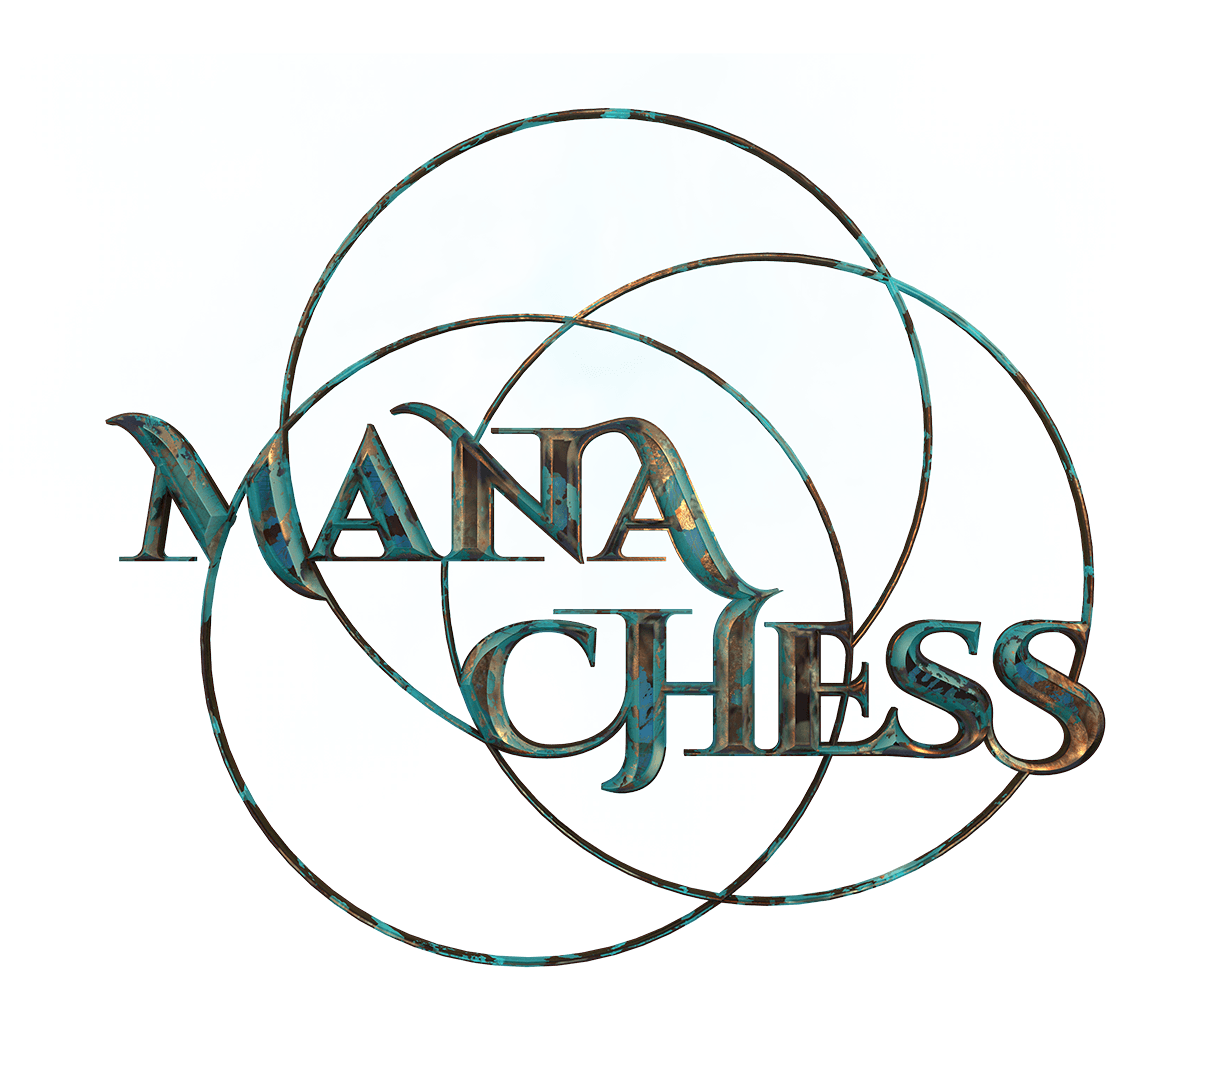 3D rendered Mana Chess logo with patina and weathering